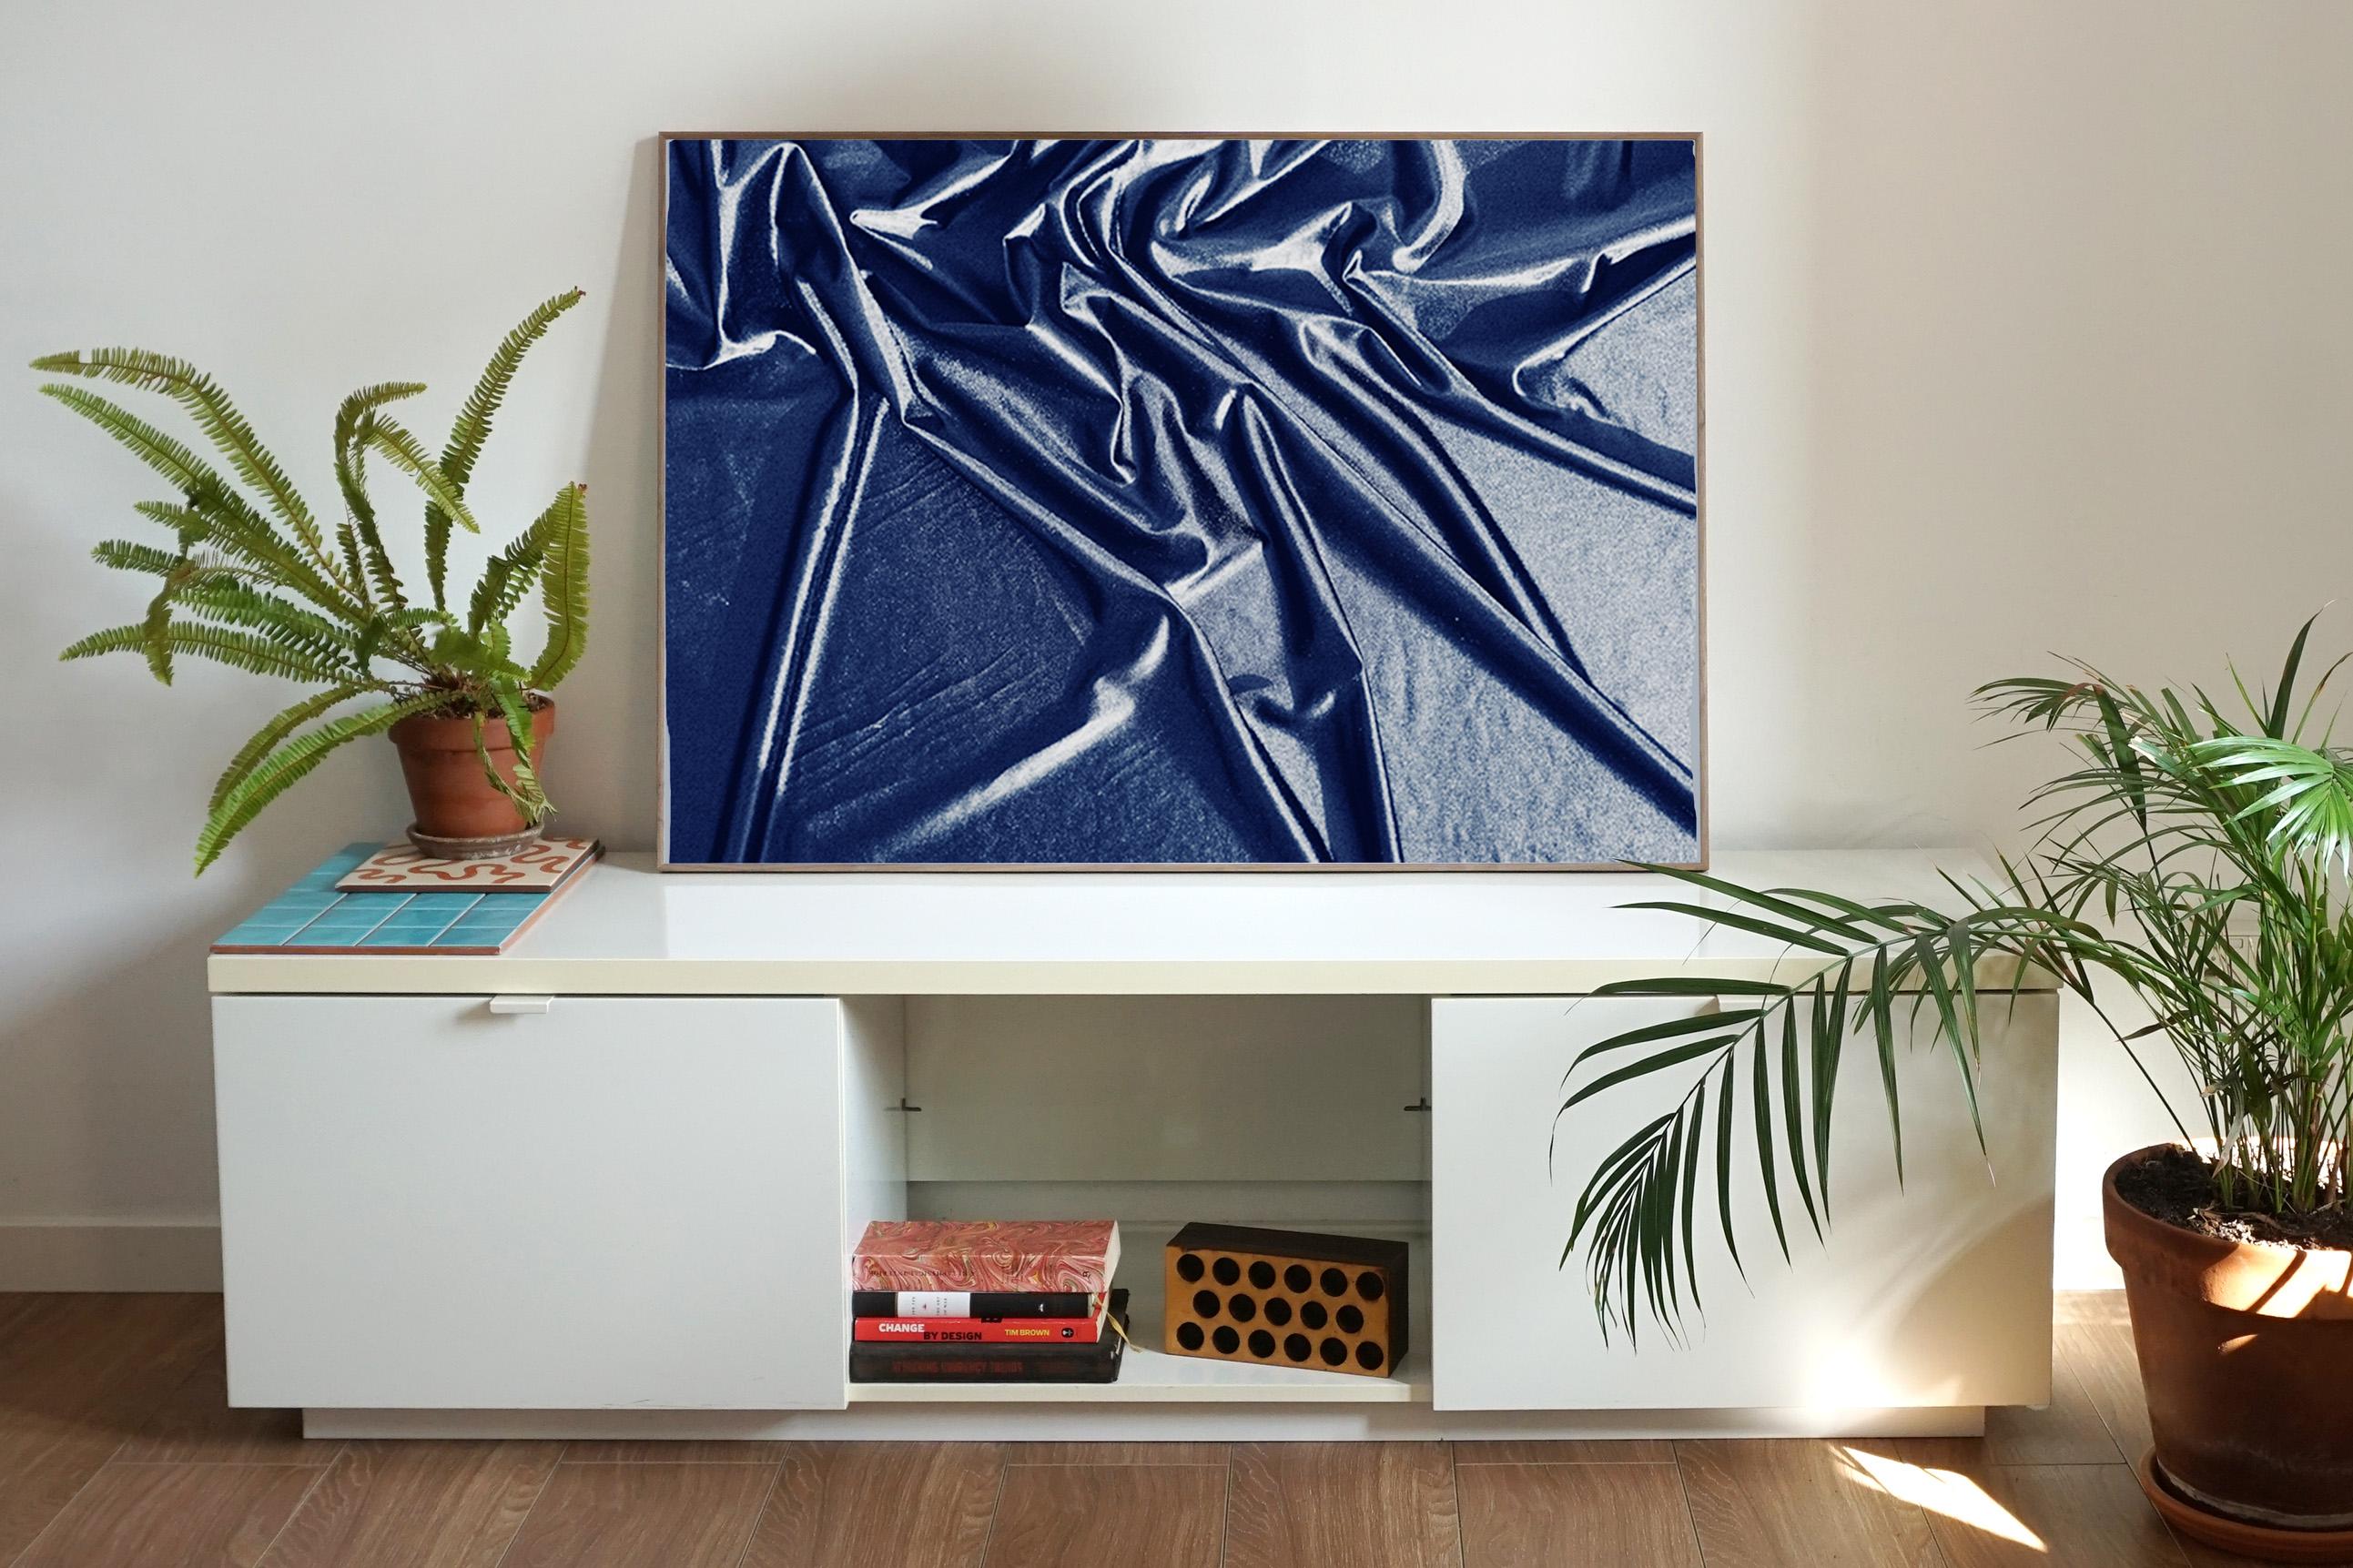 Nocturnal Hint in Manhattan, Classic Blue Cyanotype, Contemporary Print 100x70cm - Painting by Kind of Cyan